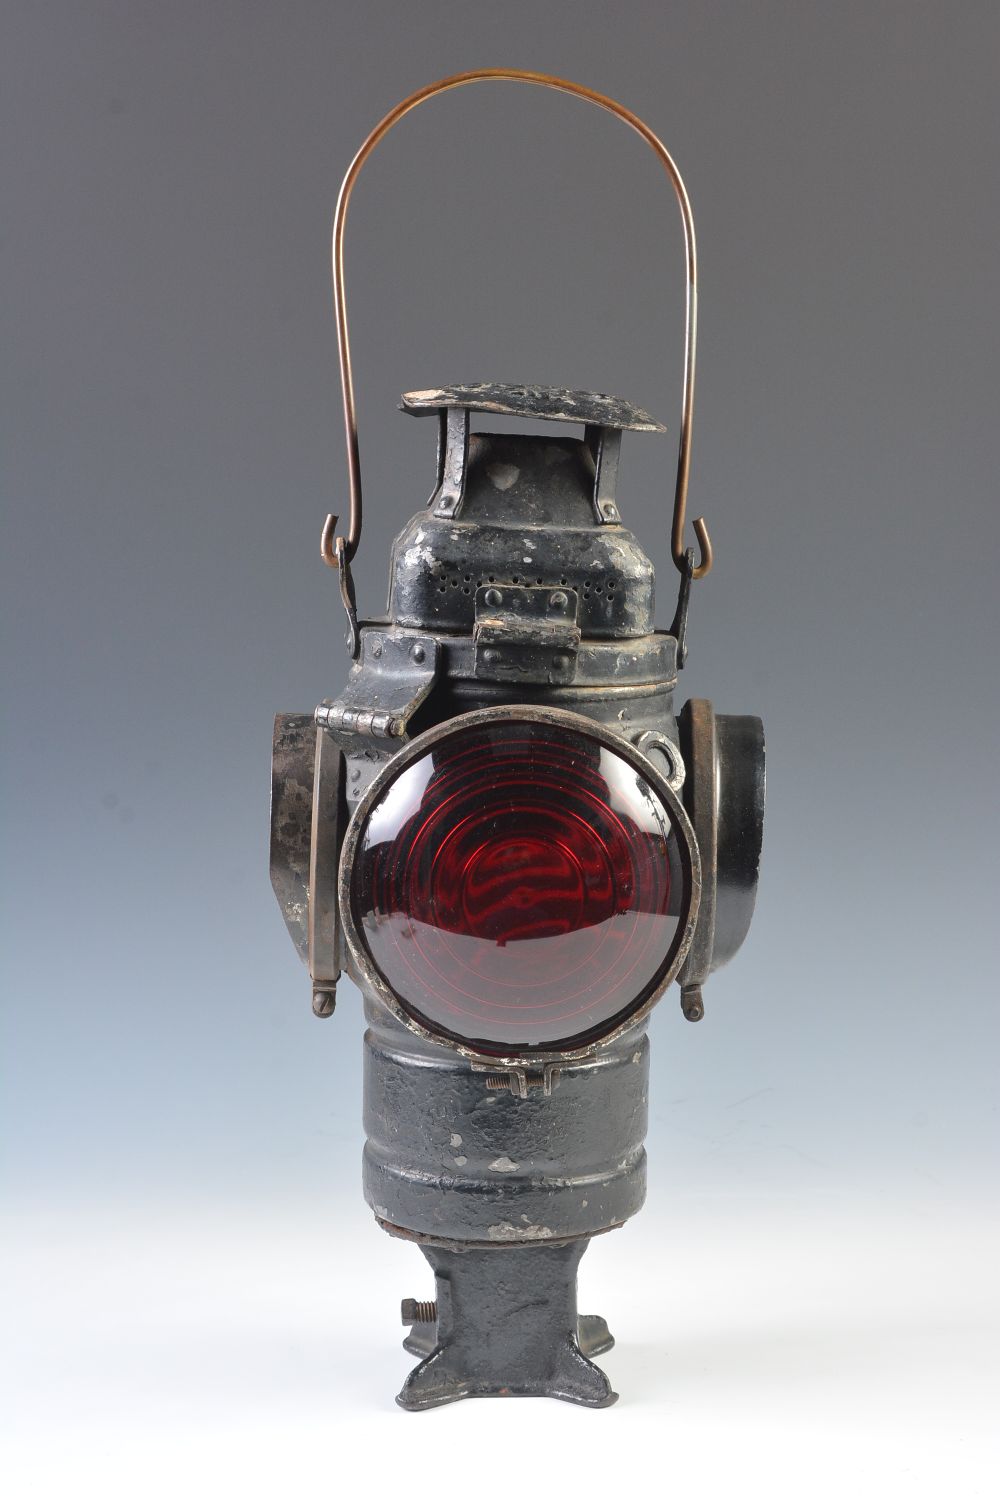 A BURLINGTON ROUTE SWITCH LAMP MADE BY ADLAKE